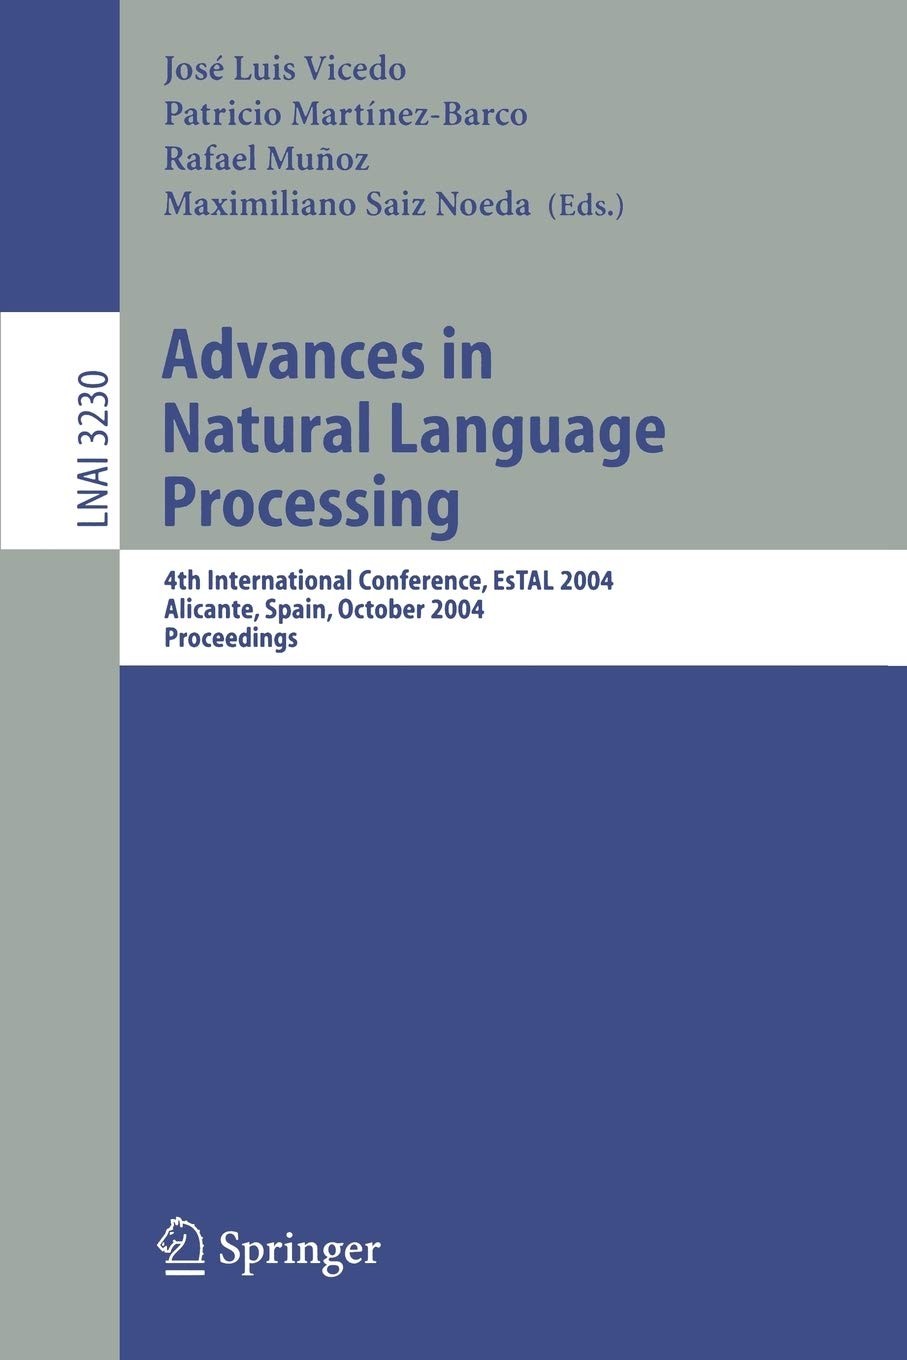 Advances in Natural Language Processing: 4th International Conference, EsTAL 2004, Alicante, Spain, October 20-22, 2004. Proceedings